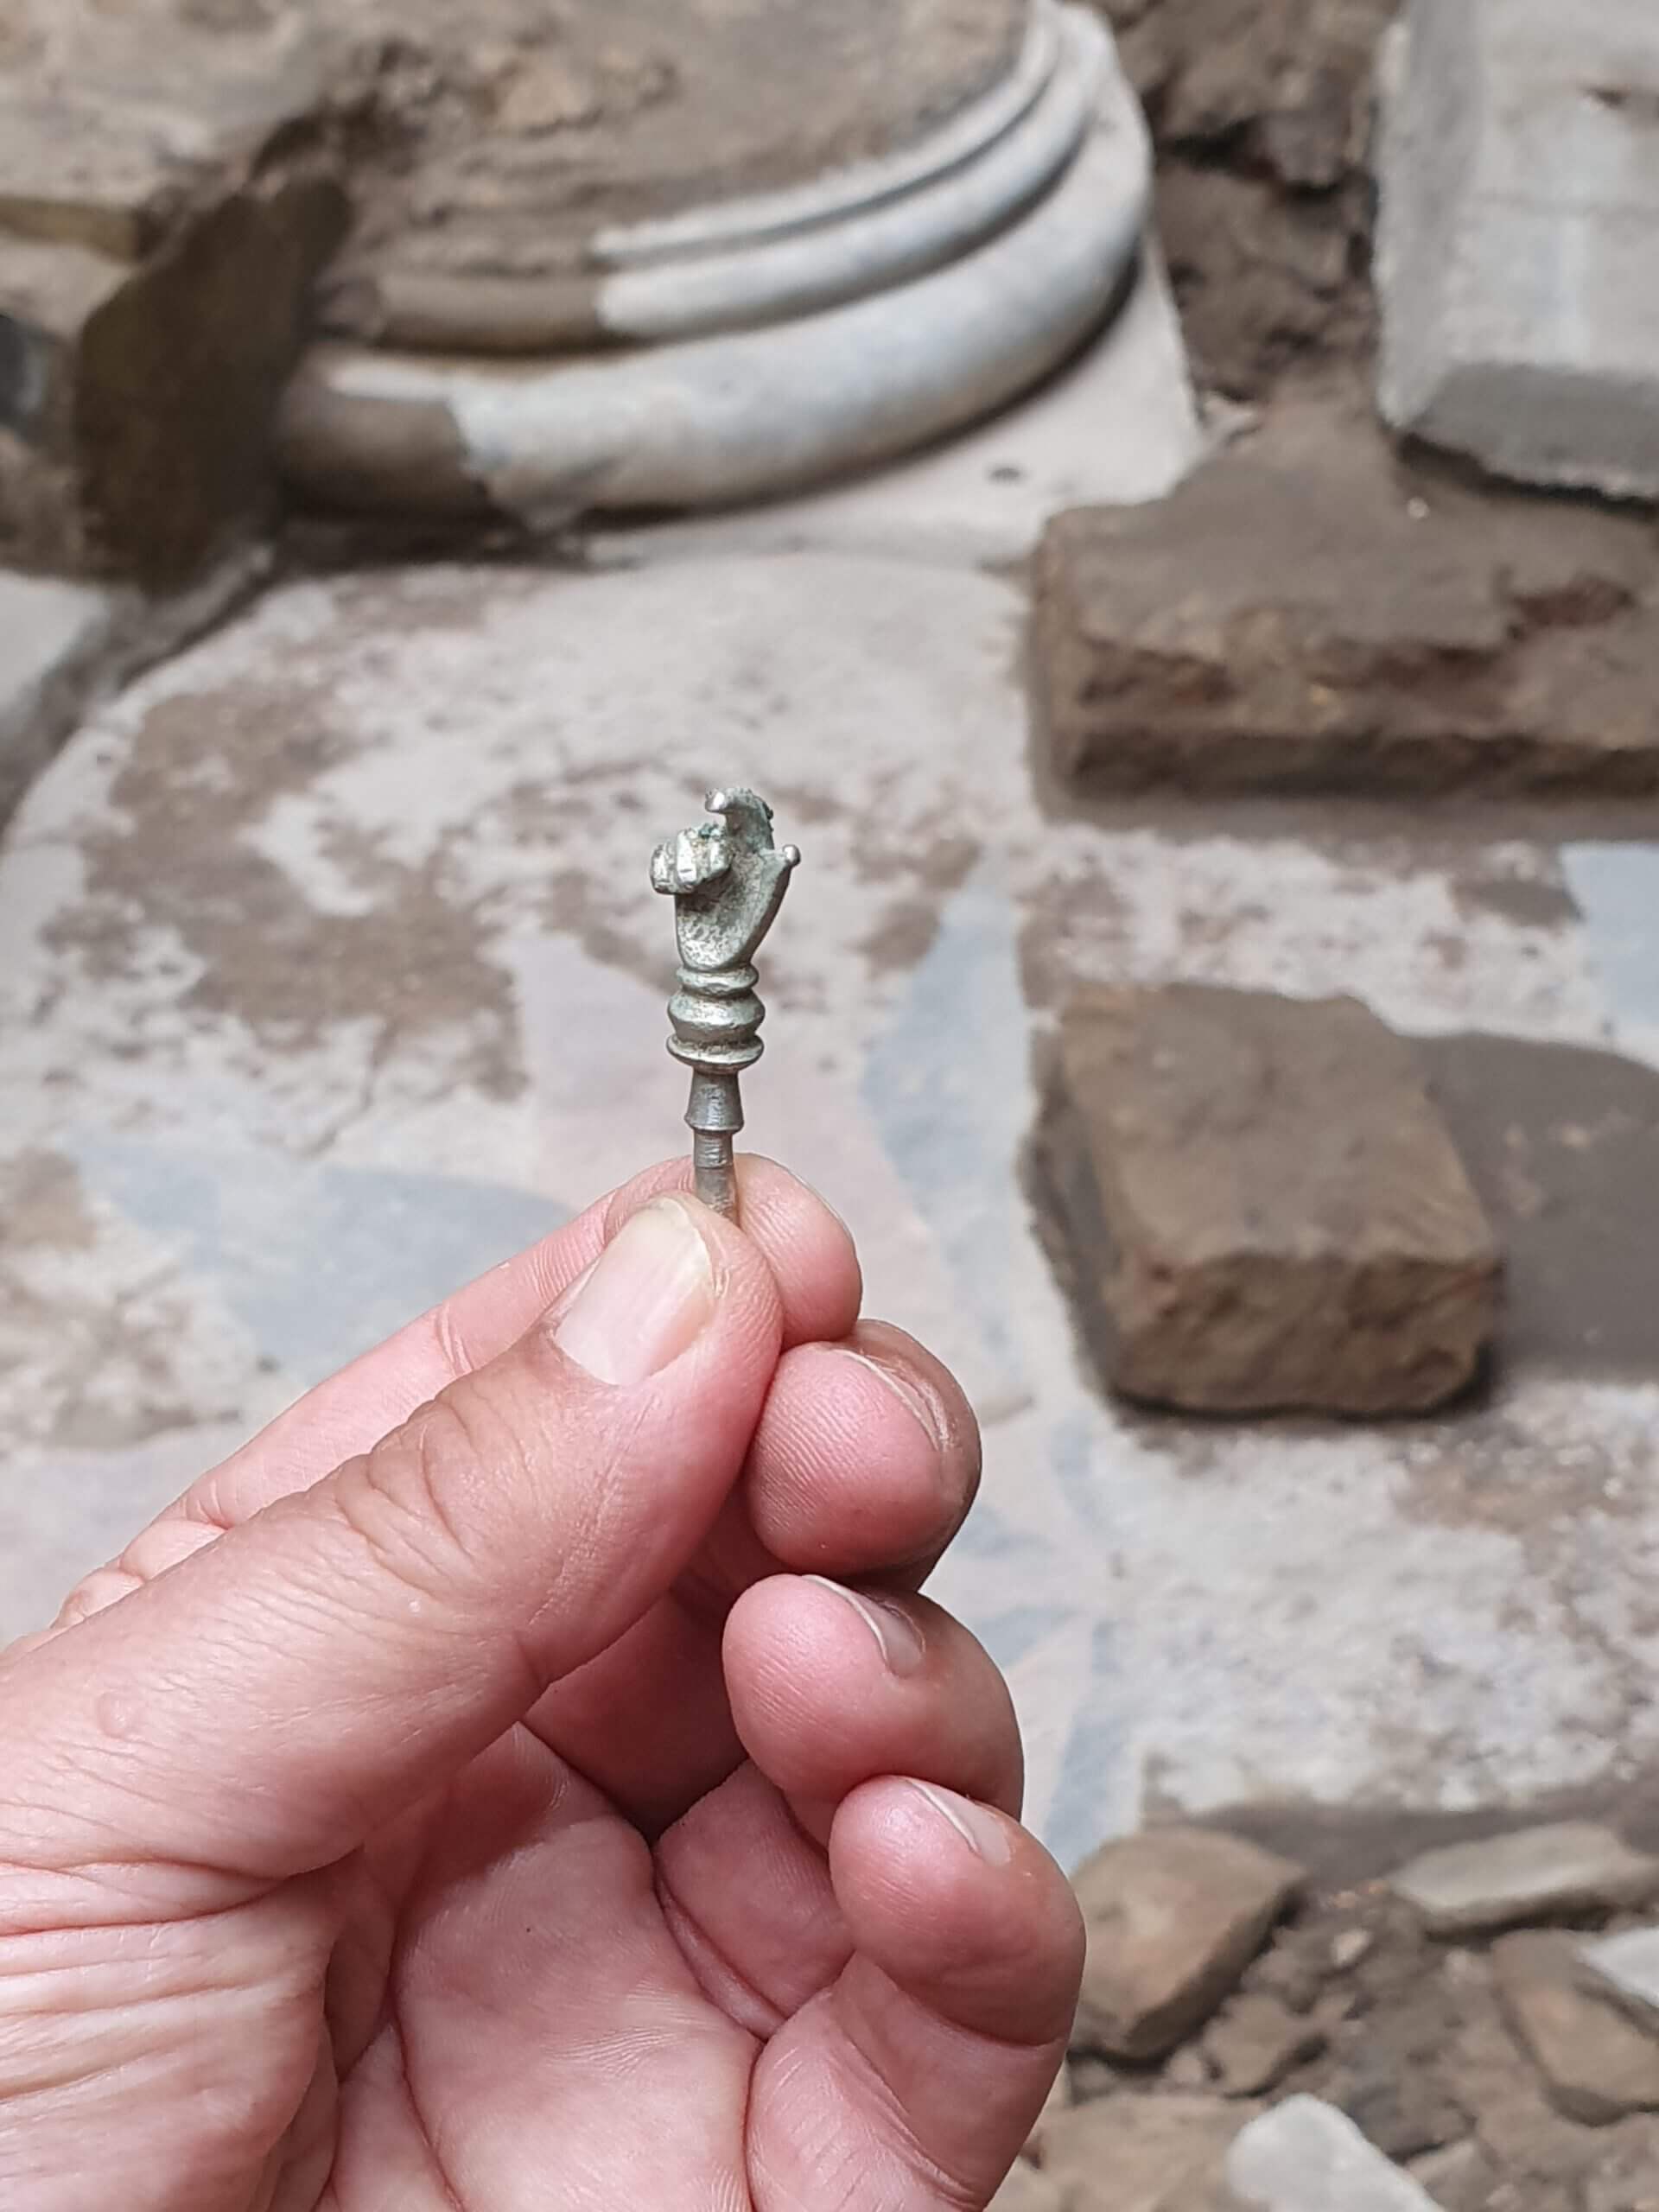 The silver hand that was revealed against the background of the synagogue stage where it was discovered. Photo by John Seligman, Israel Antiquities Authority